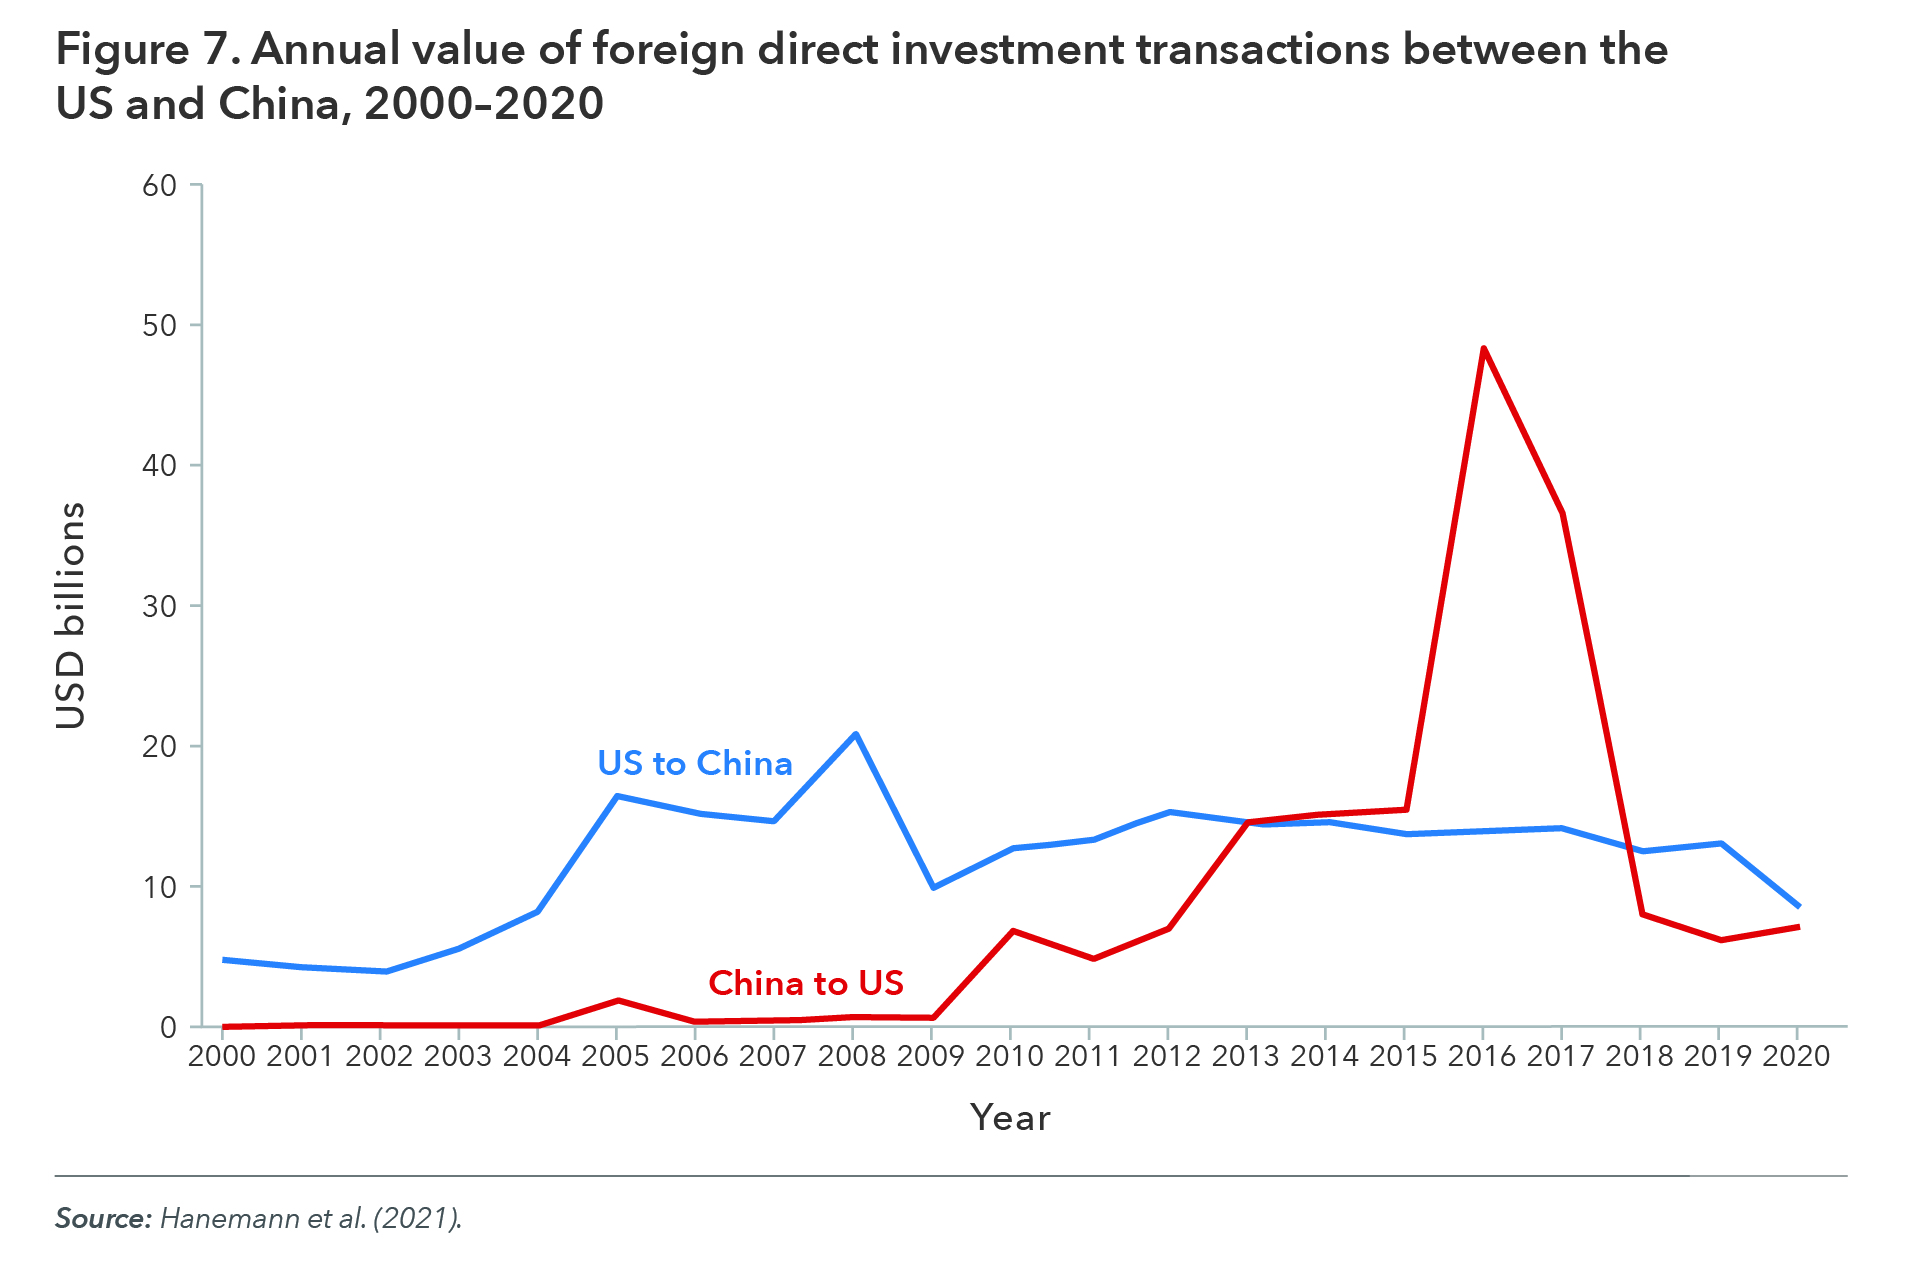 Figure 7: Annual Value of Foreign Direct Investment Transactions Between the US and China, 2000-2020